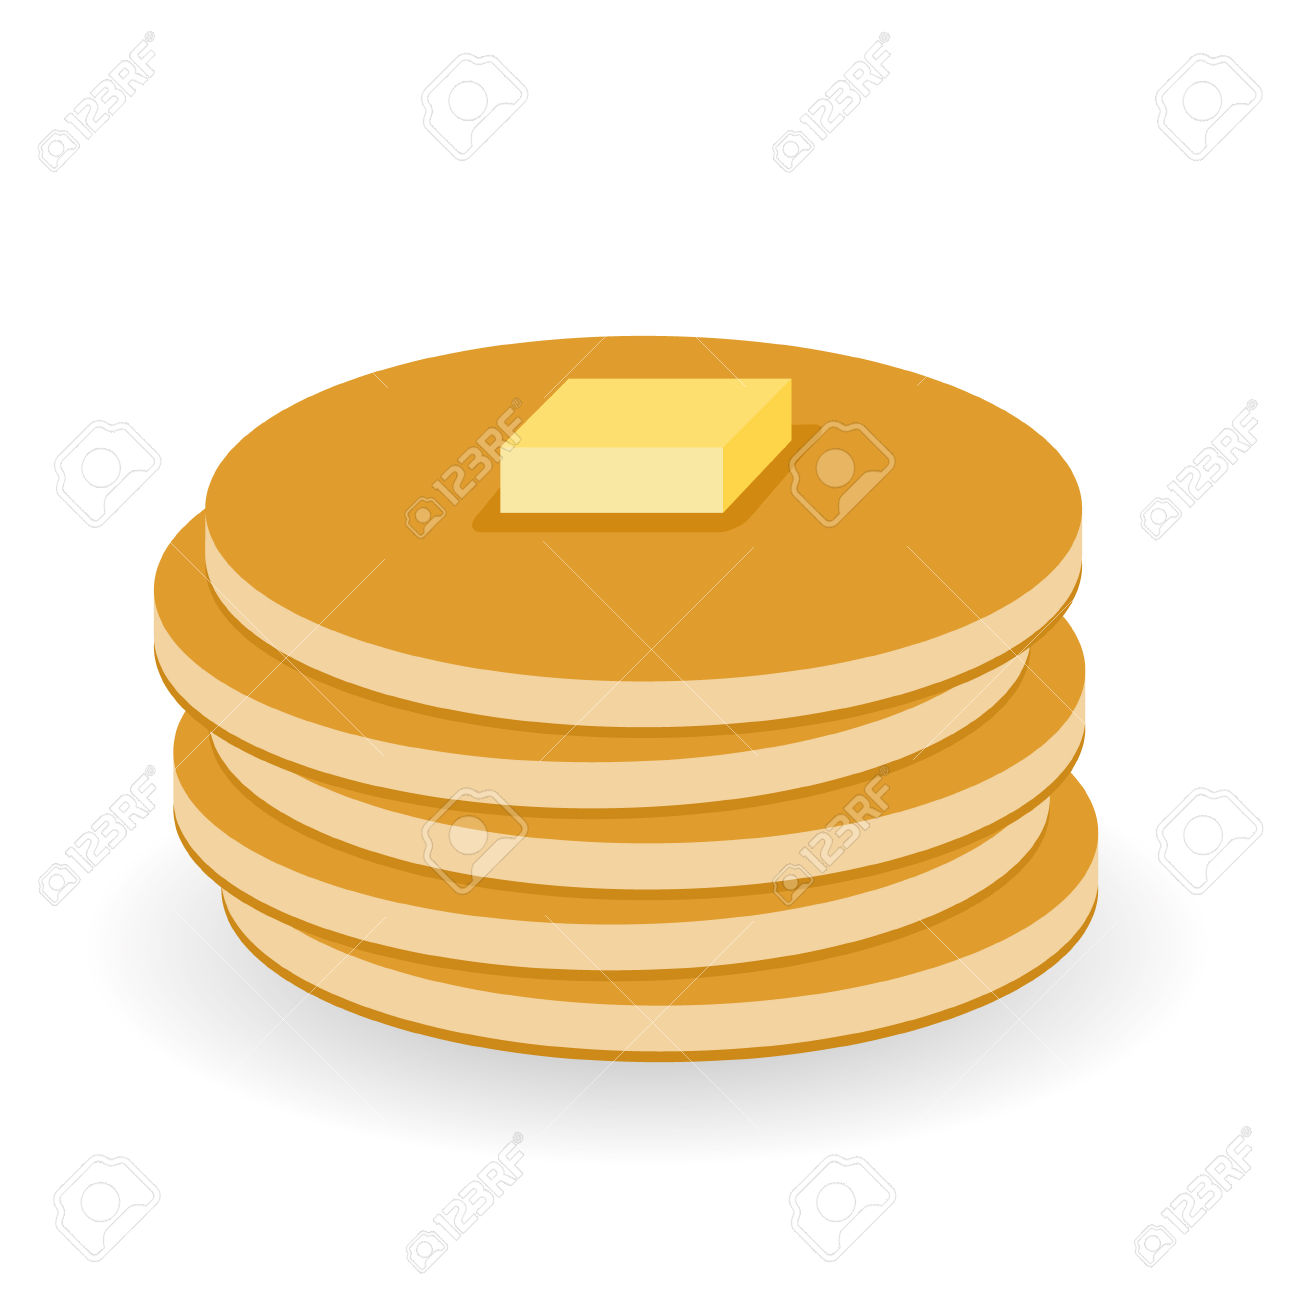 1000 images about Pancake Breakfast on Pinterest | Blue berry, Adoption and Clip art